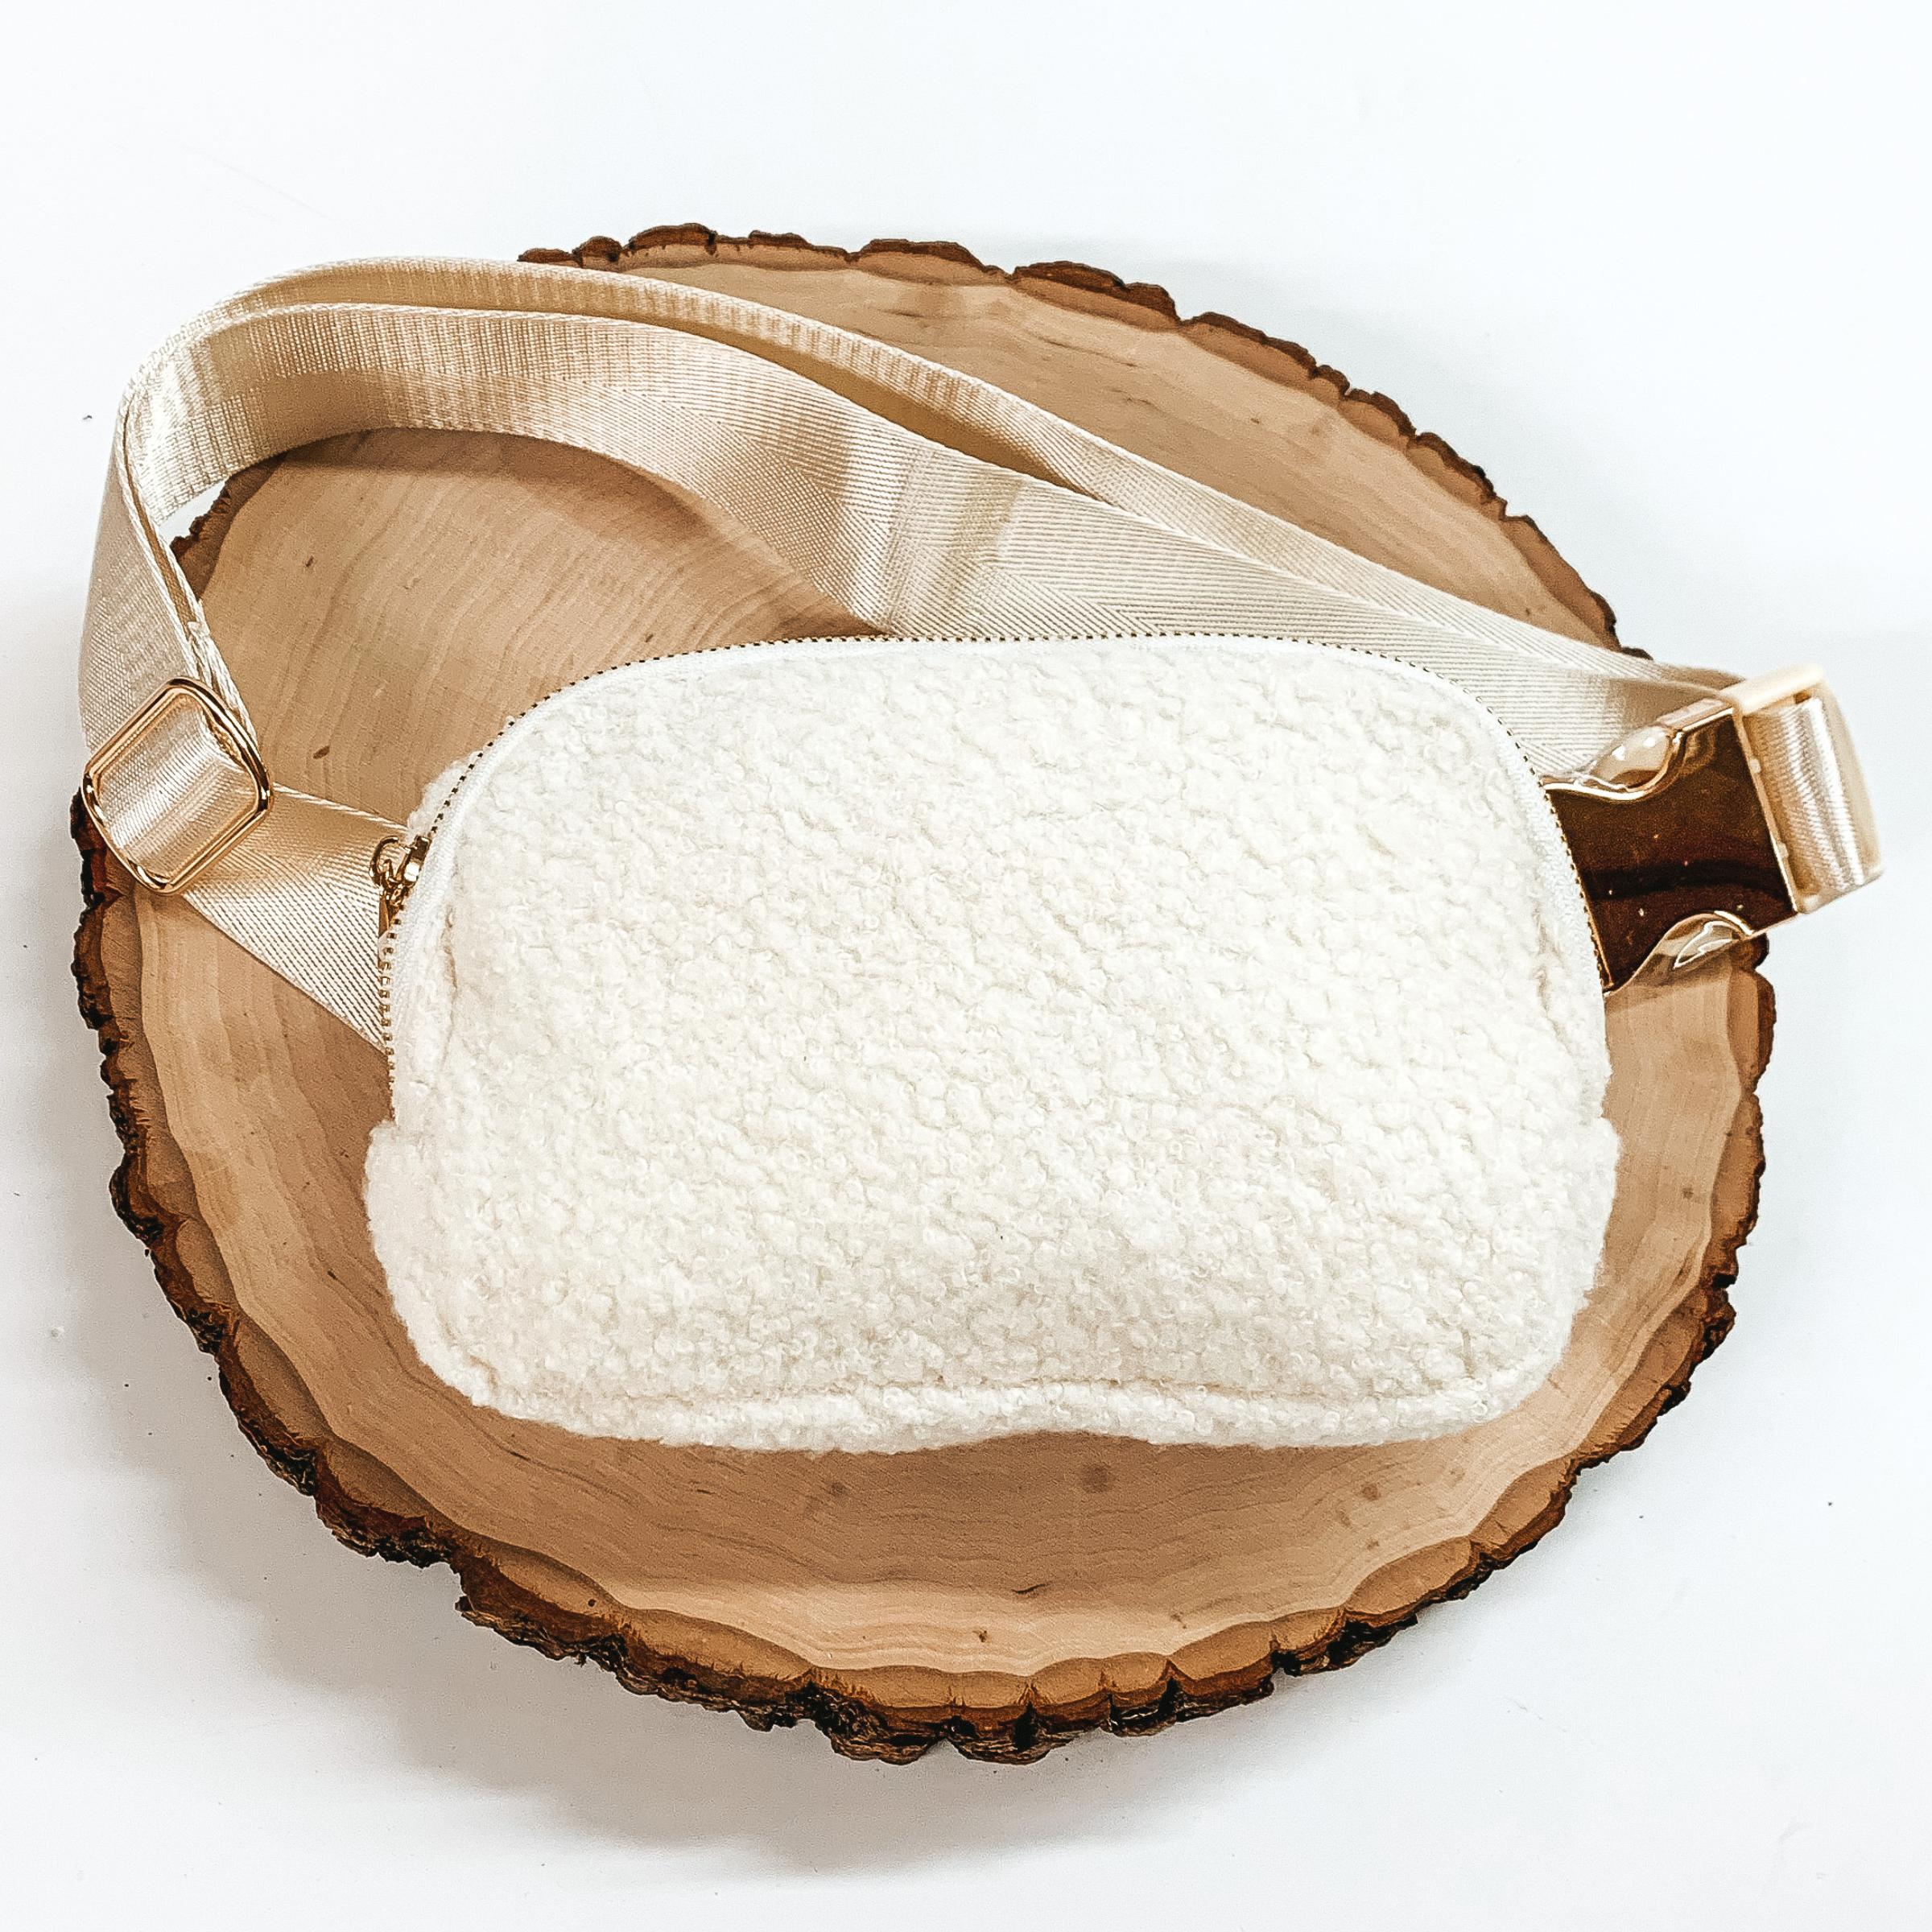 Ivory, sherpa fanny pack with a top zipper across the front. This fanny pack also includes ivory straps and gold clips. This fanny pack is pictured on a piece of wood on a white background. 